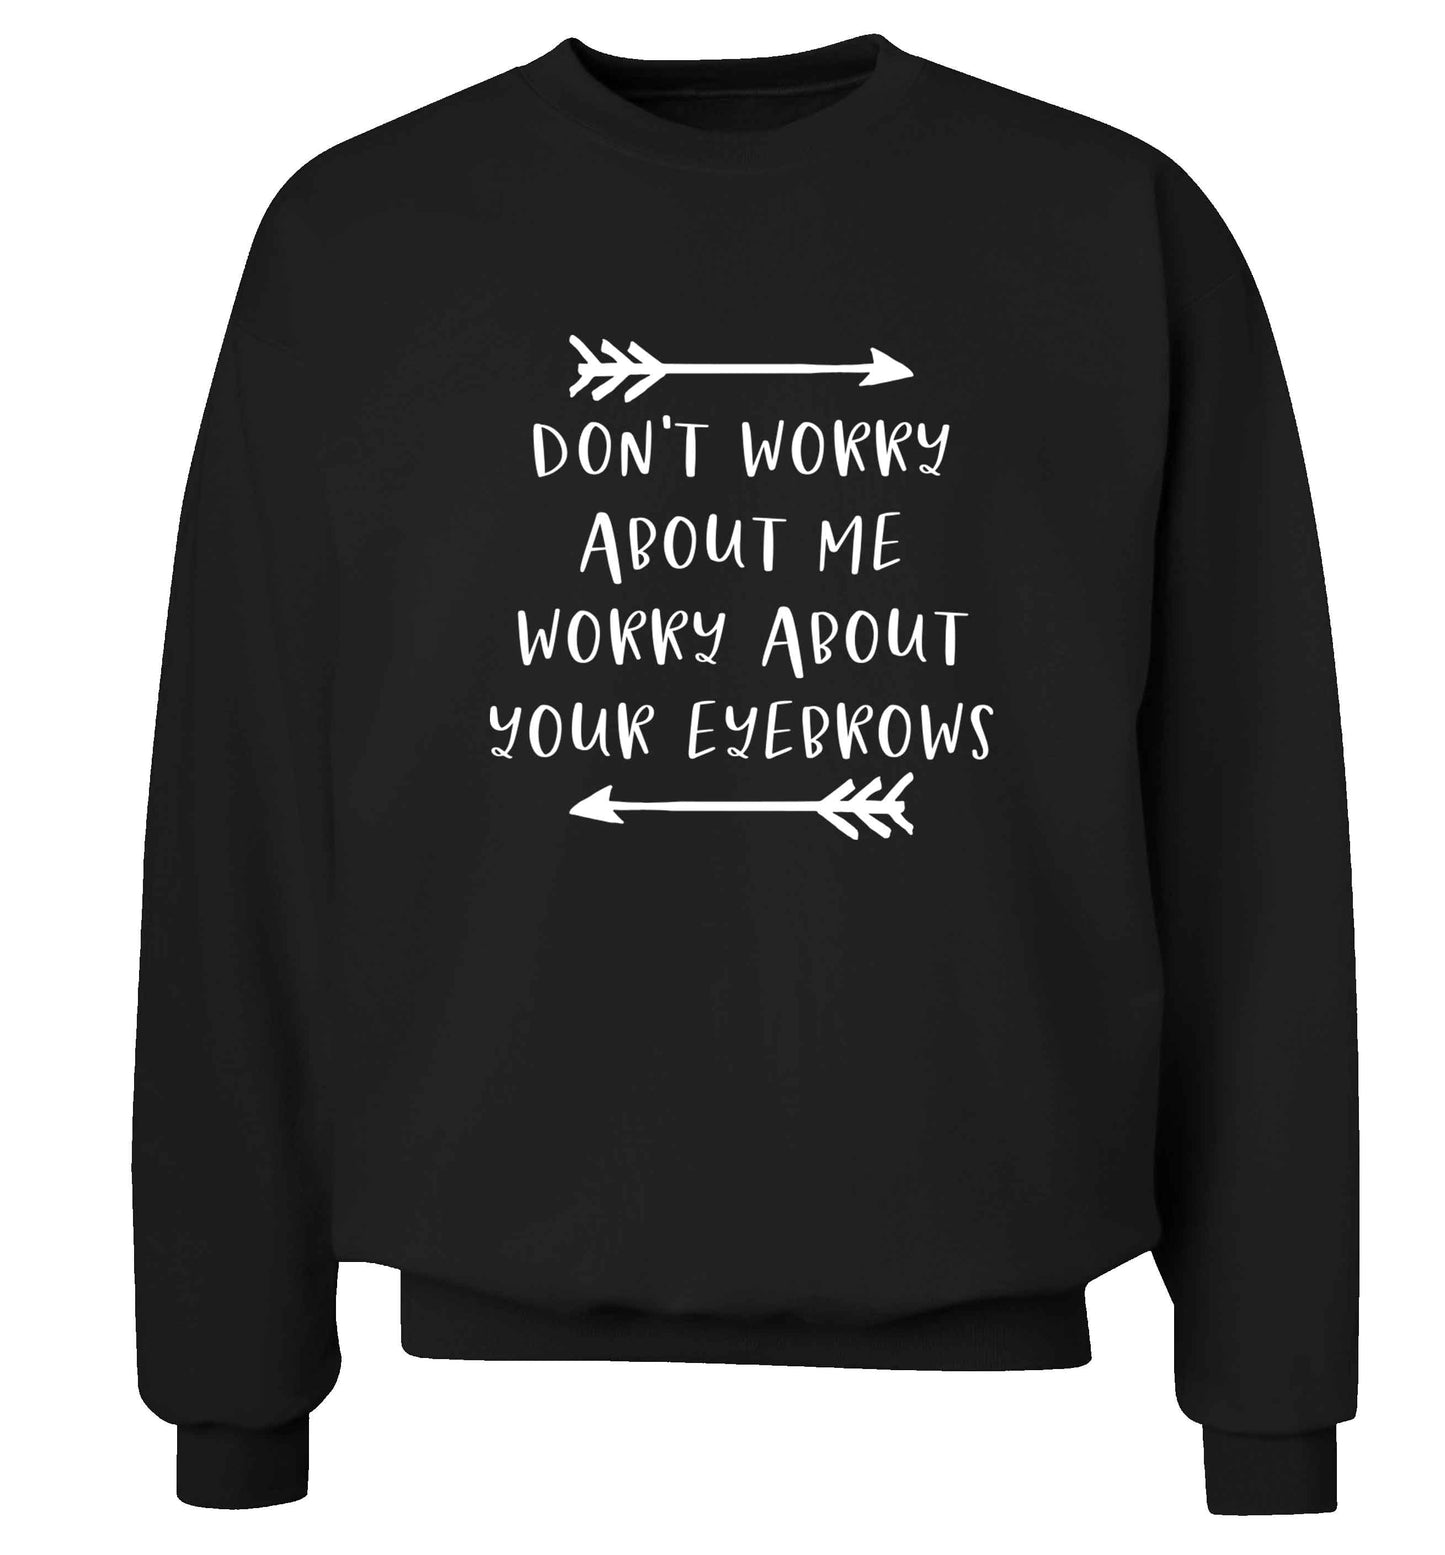 Don't worry about me worry about your eyebrows adult's unisex black sweater 2XL